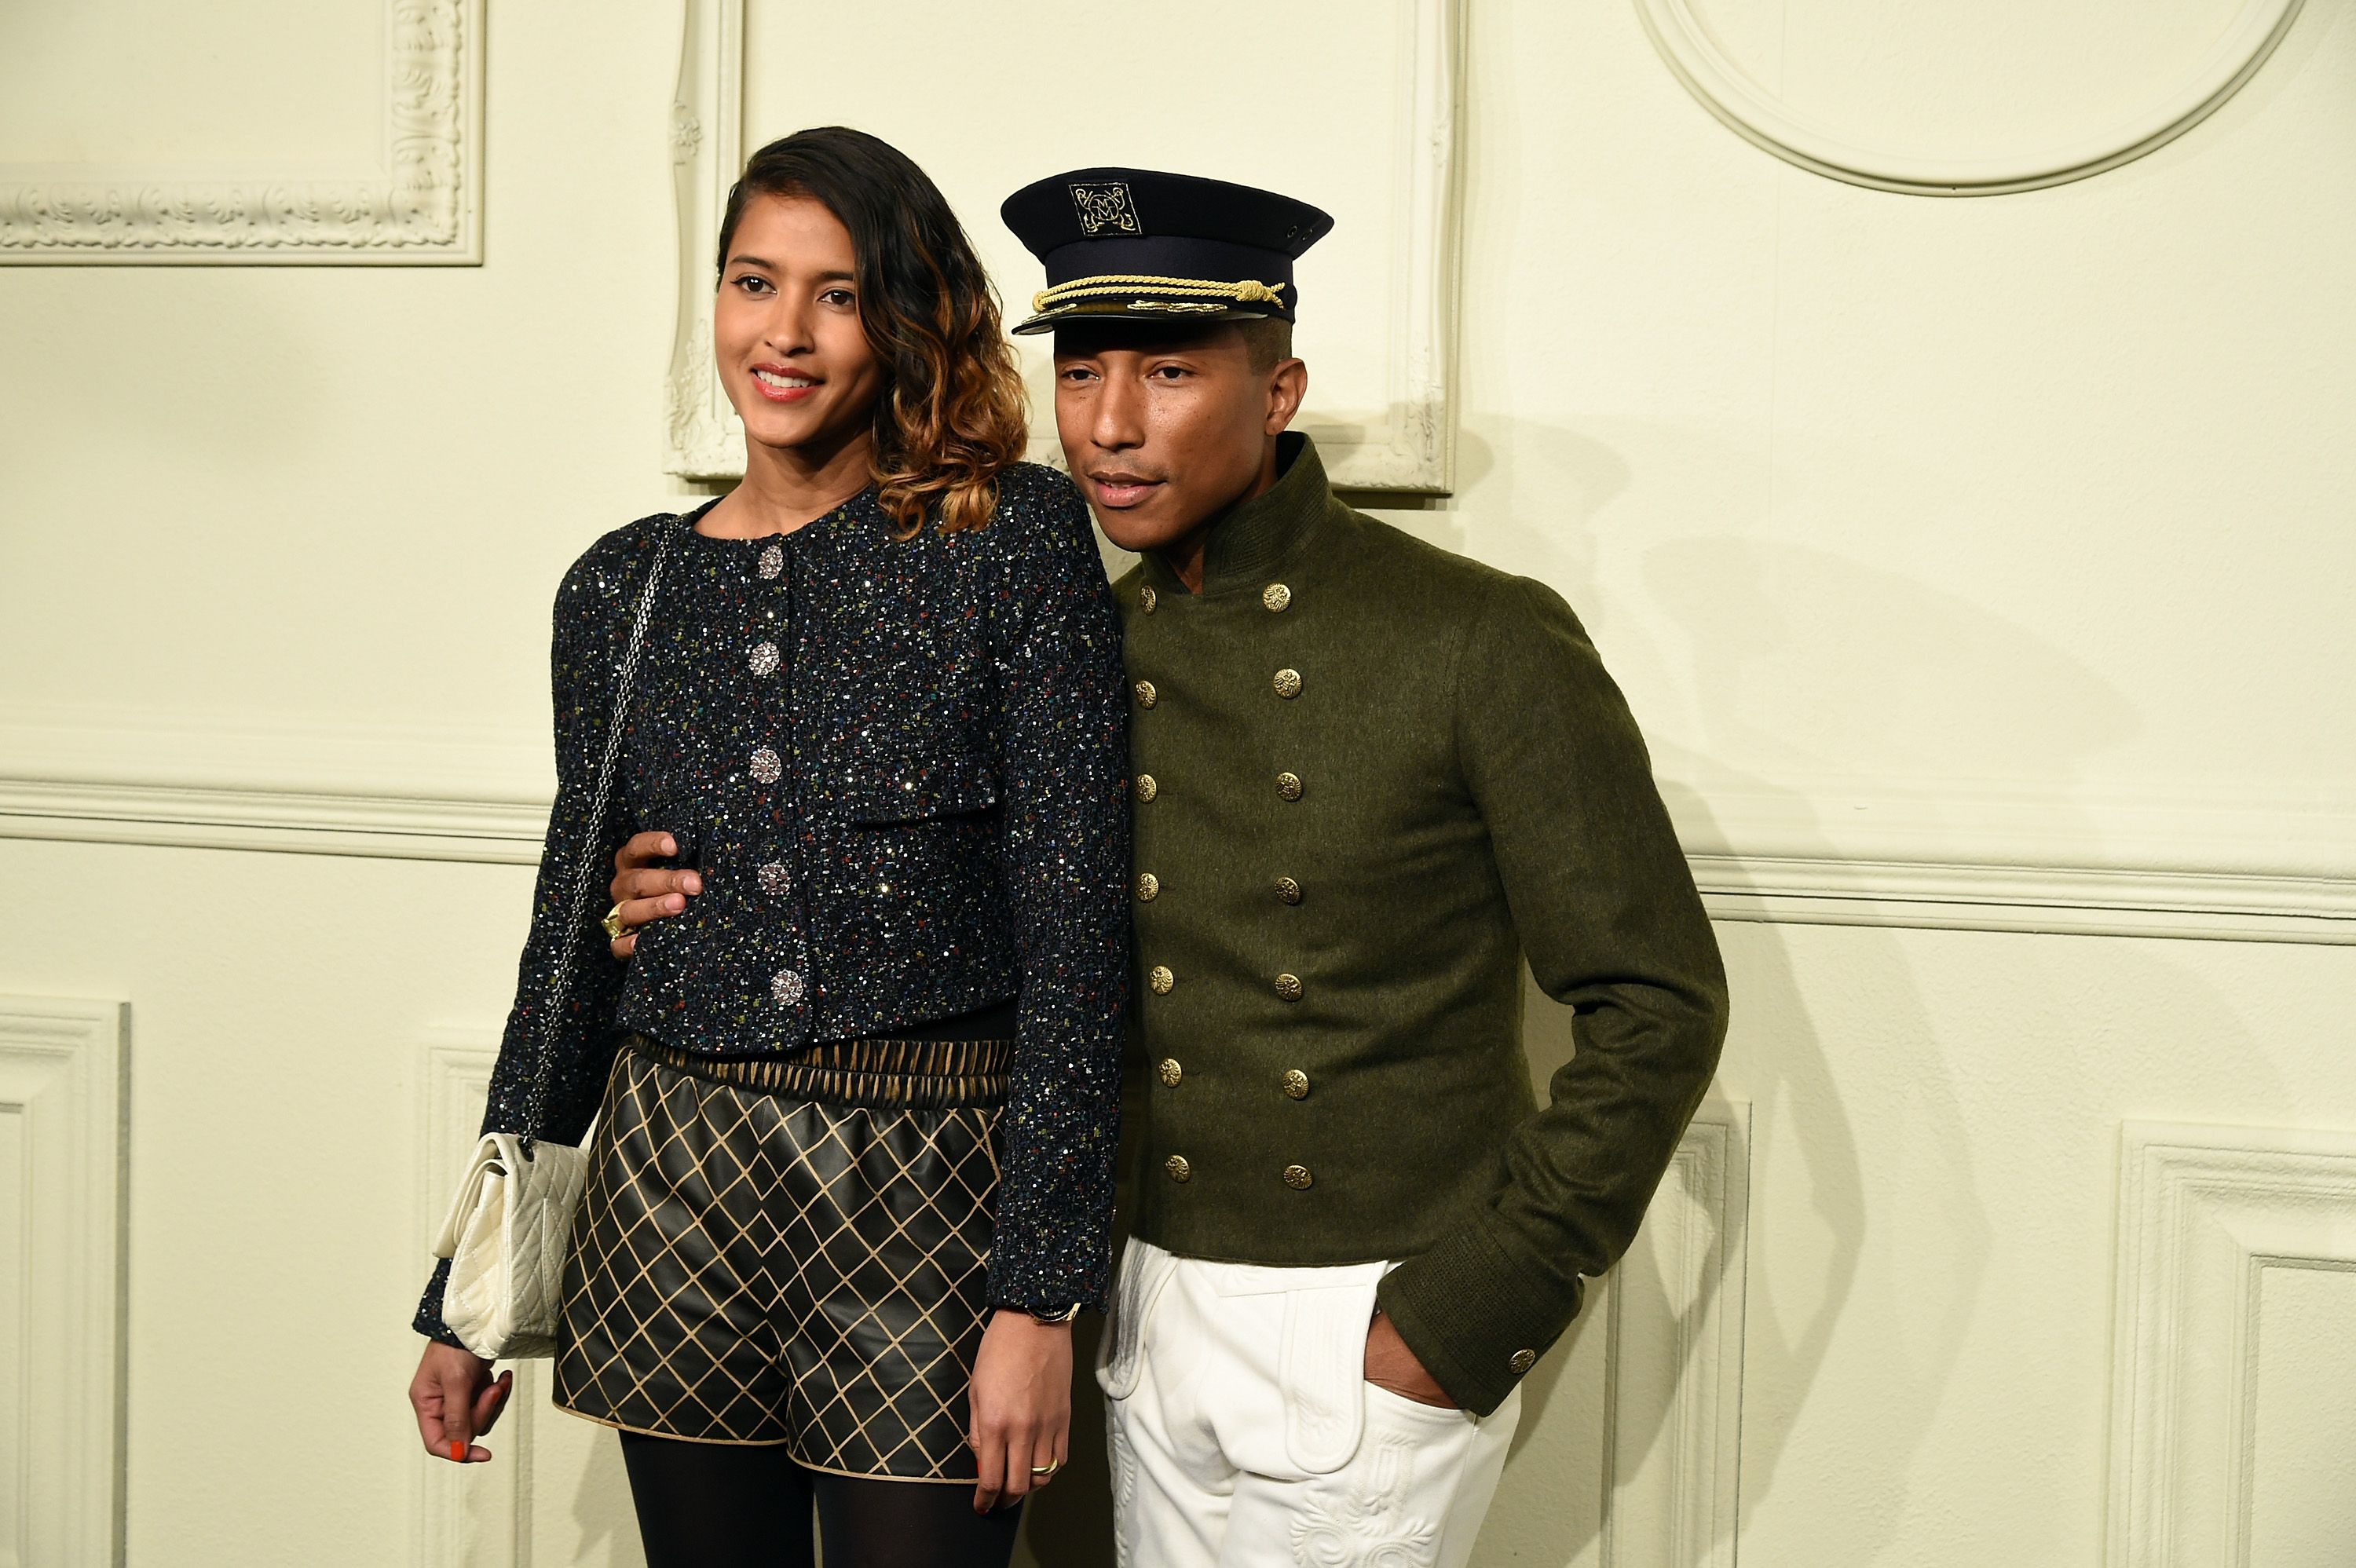 Pharrell Williams is joined by his wife Helen and son Rocket for a